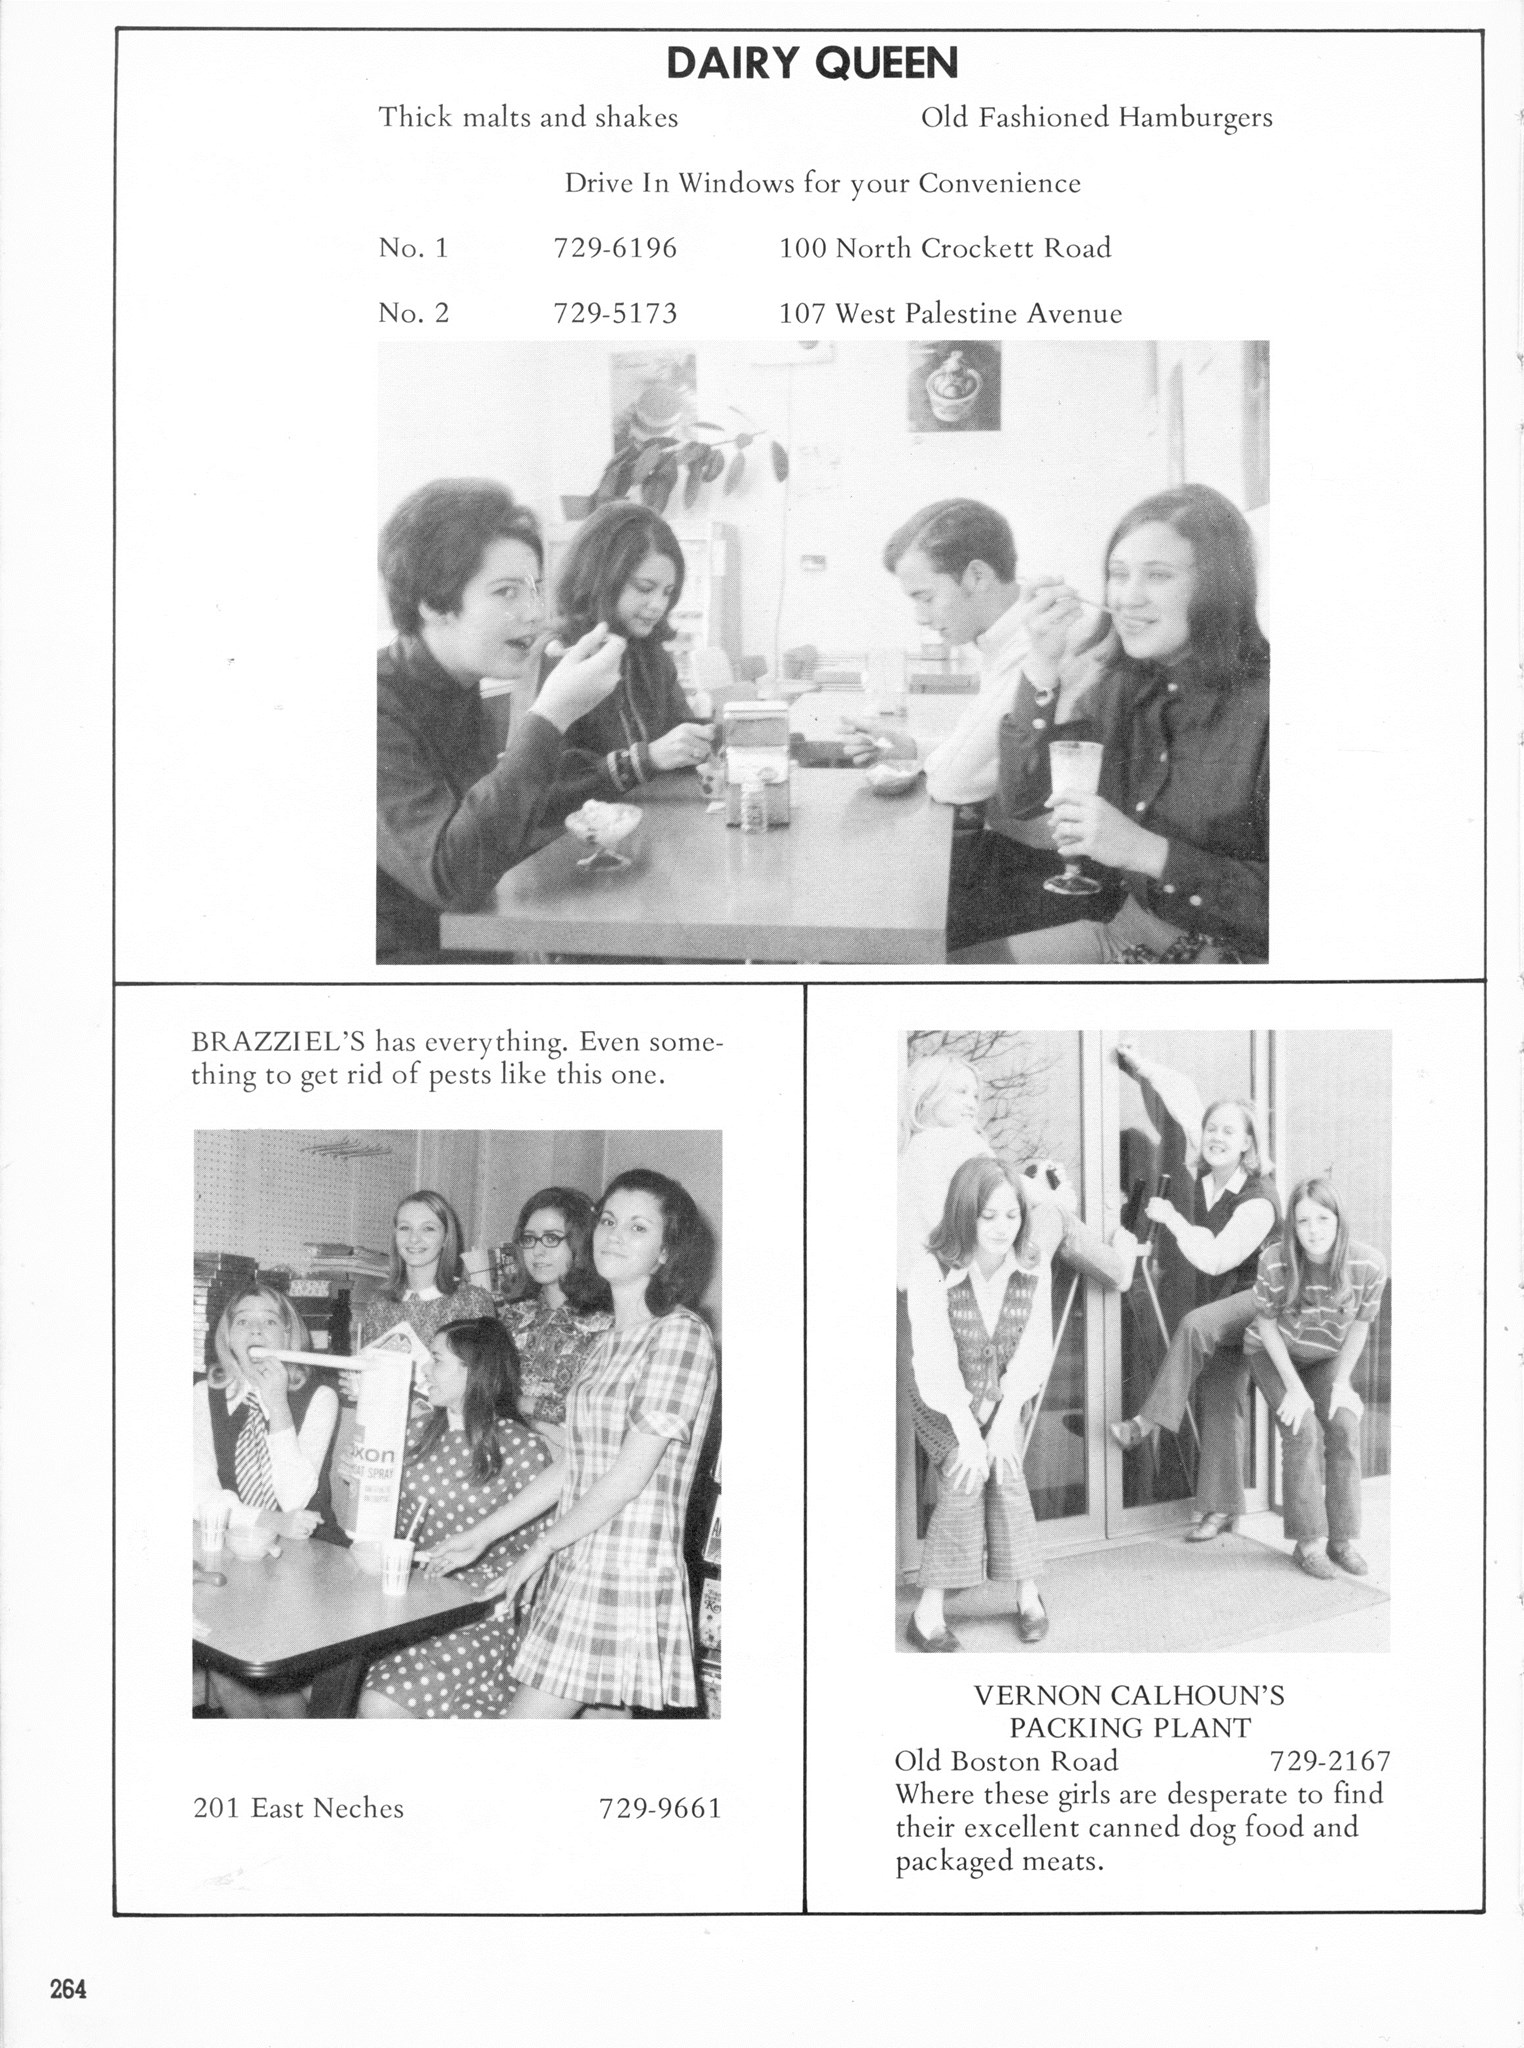 ../../../Images/Large/1970/Arclight-1970-pg0264.jpg